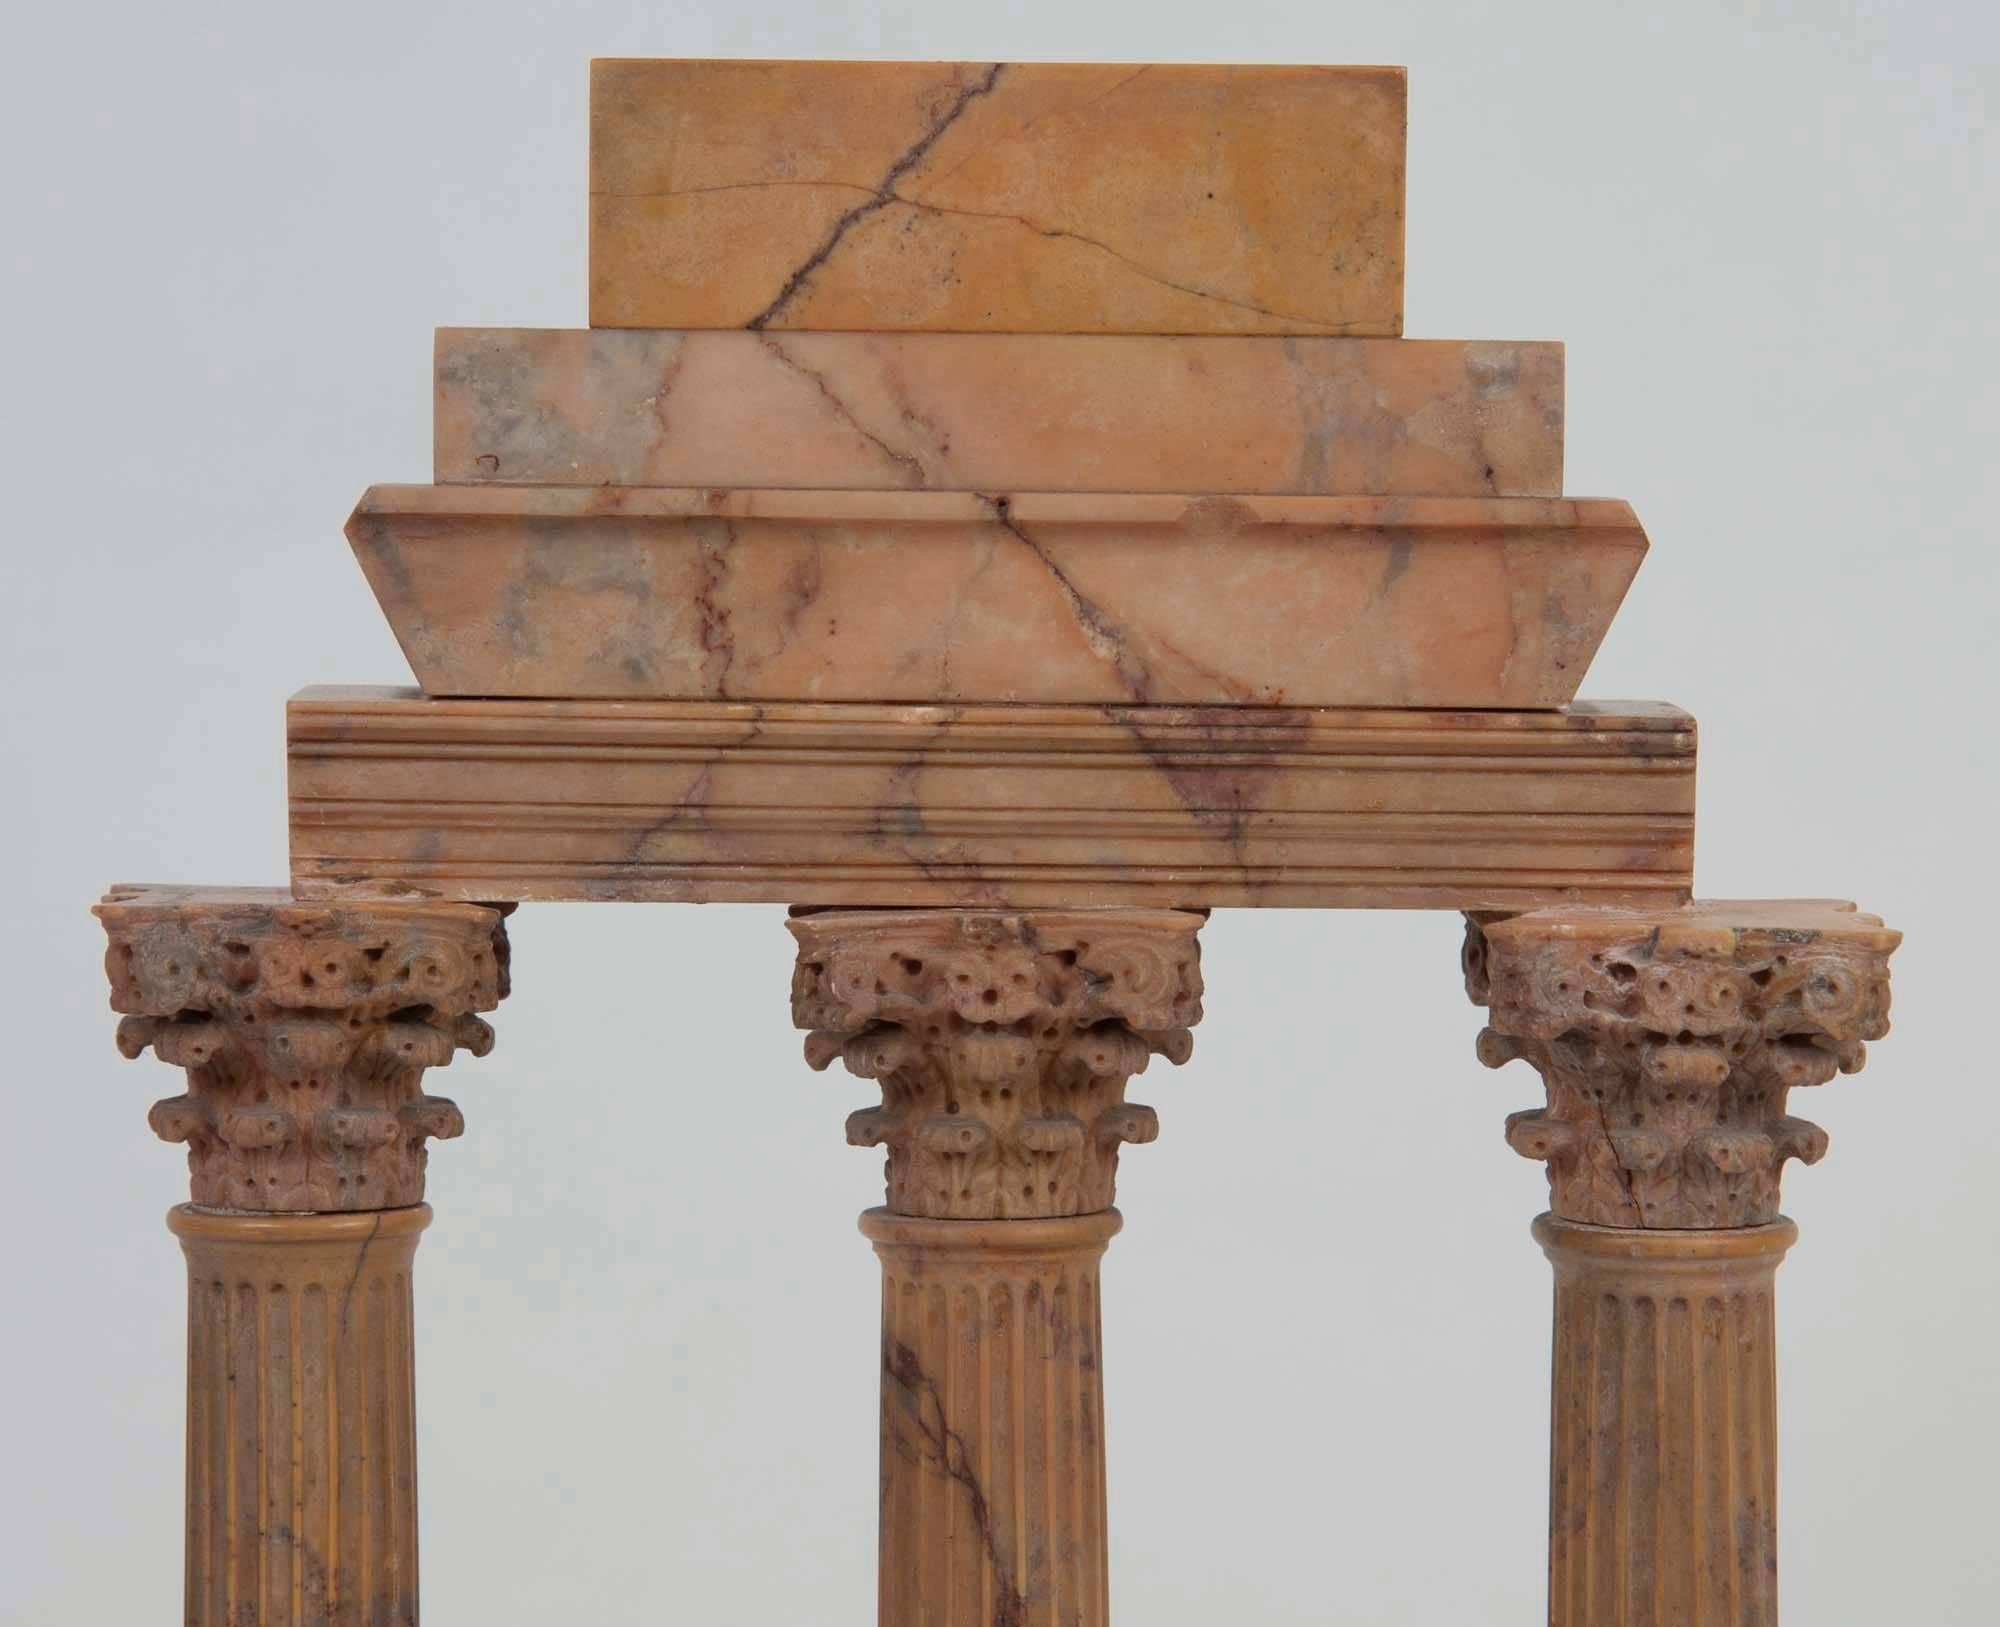 Period Grand Tour Sienna marble model of ruin, Temple of Caster and Pollux,
Italy, 19th century.